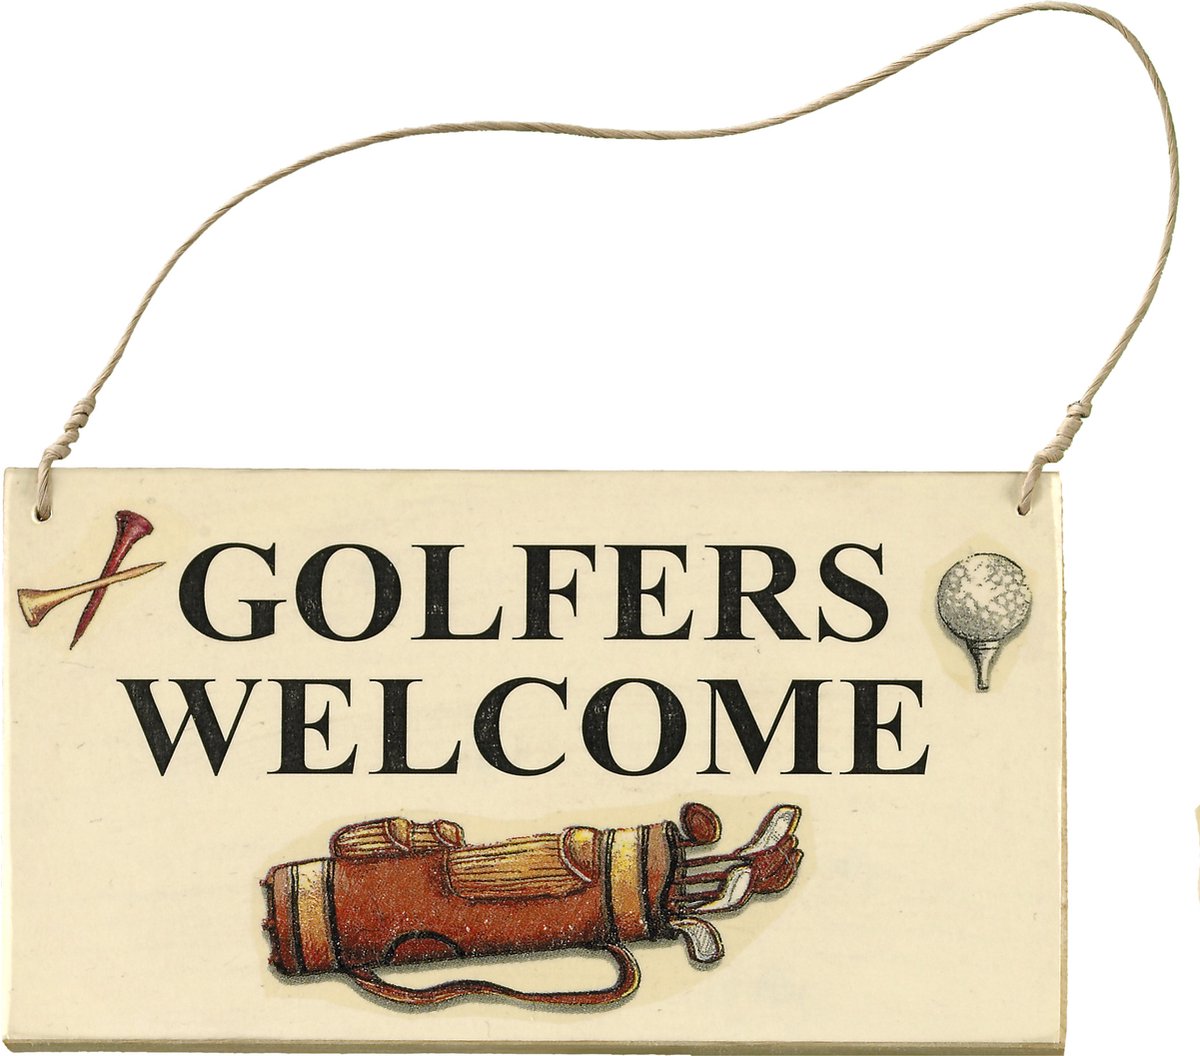 Sportiques Golf - Uithangbord - Golfers Welcome